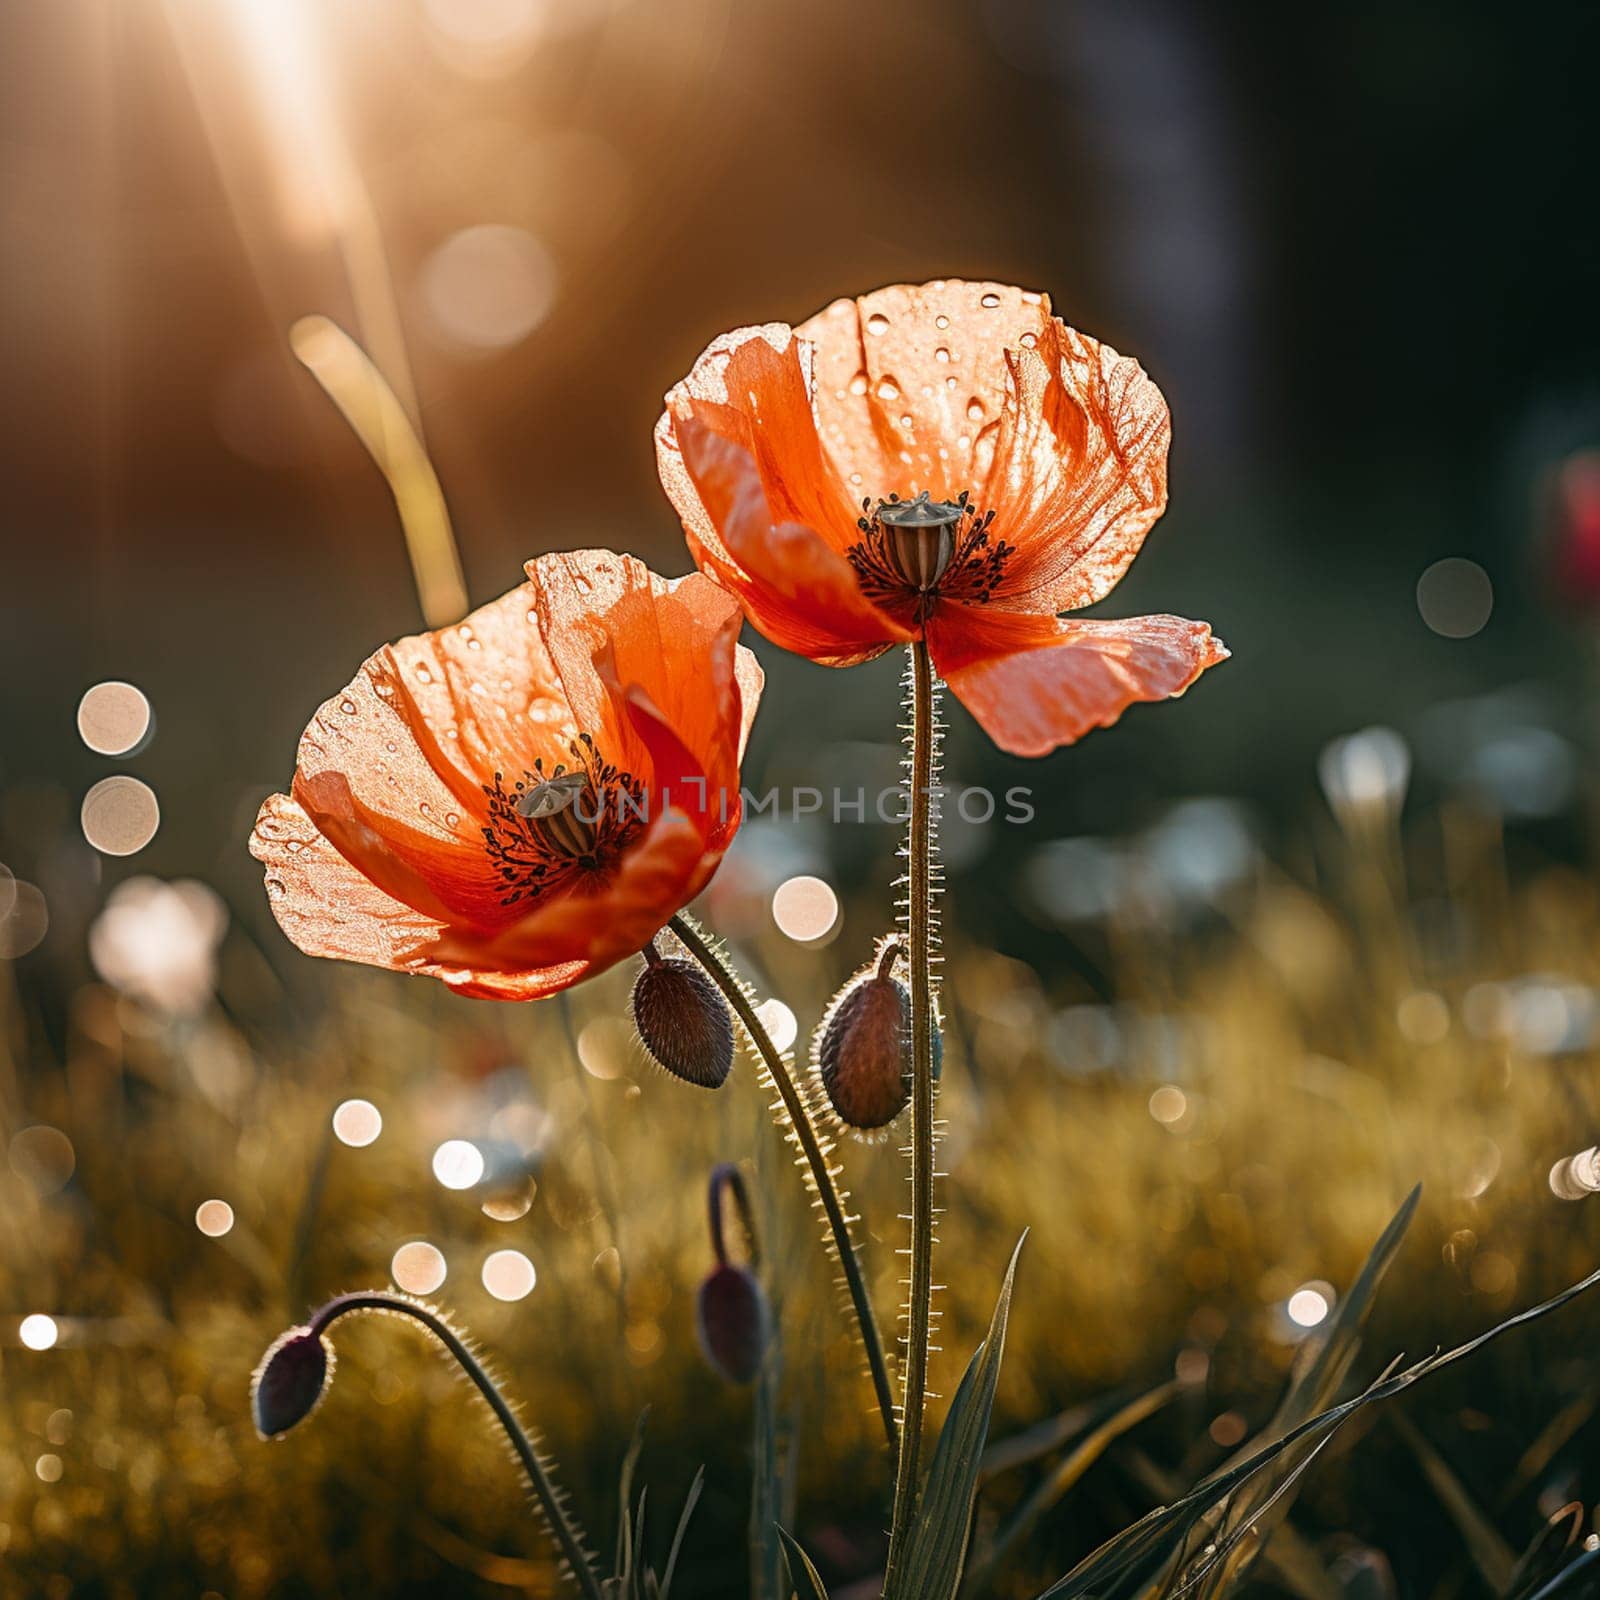 bright red poppies in the green grass. High quality photo